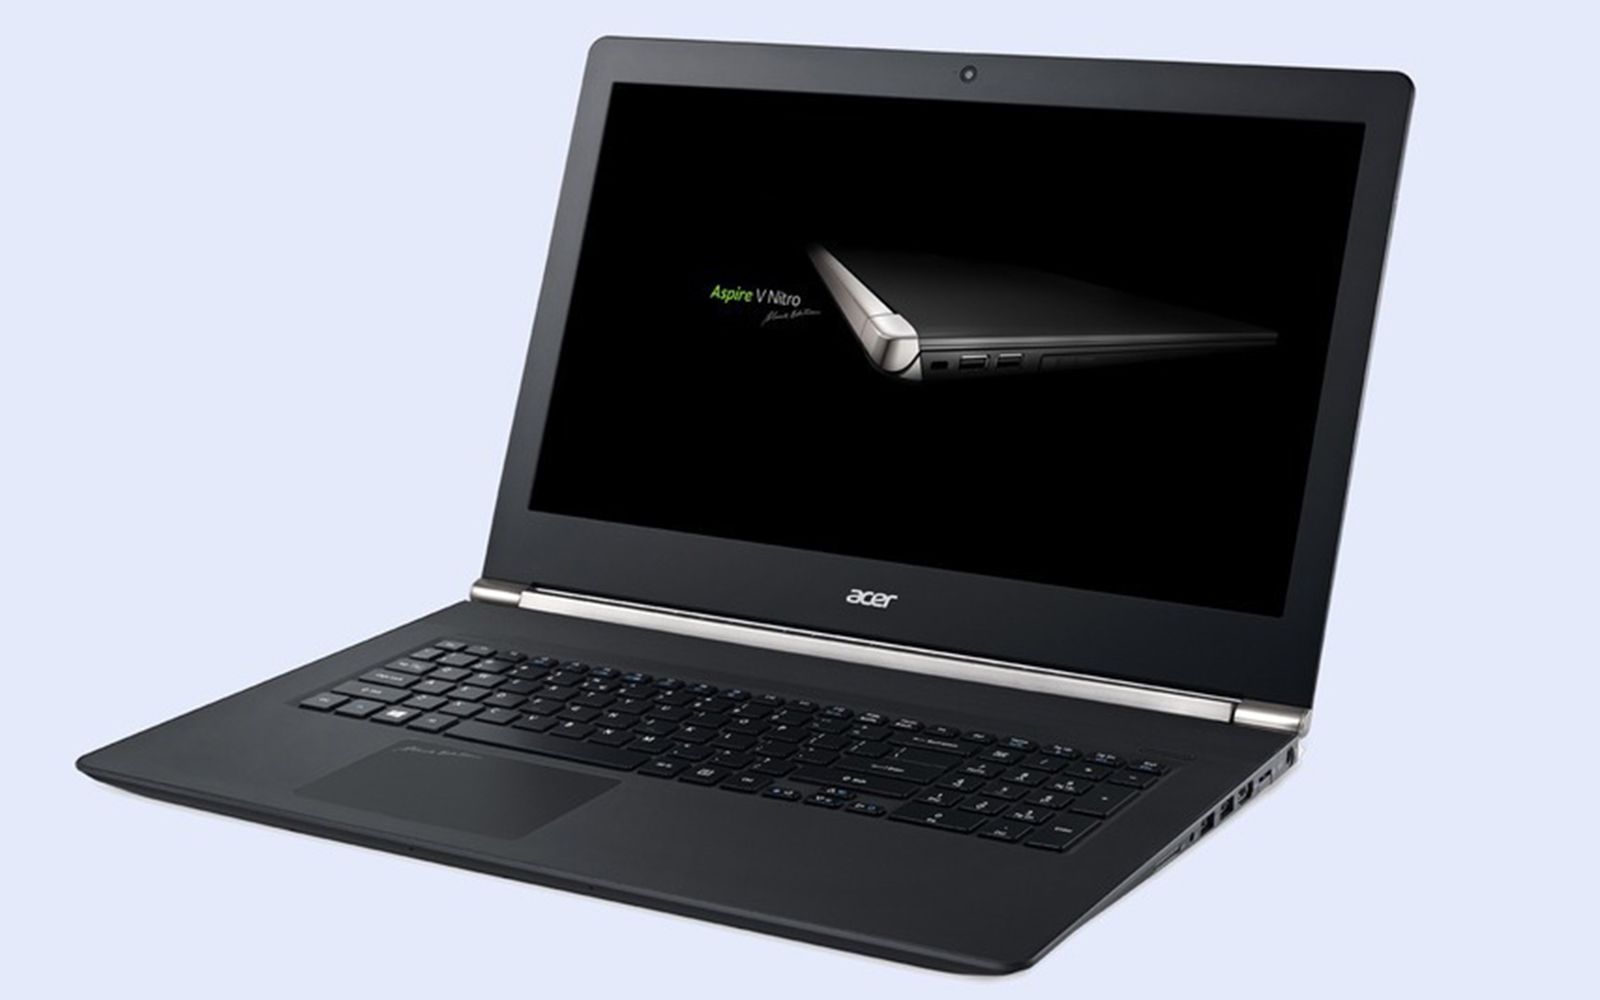 acer intel realsense laptops mean minority report gesture controls are here image 1